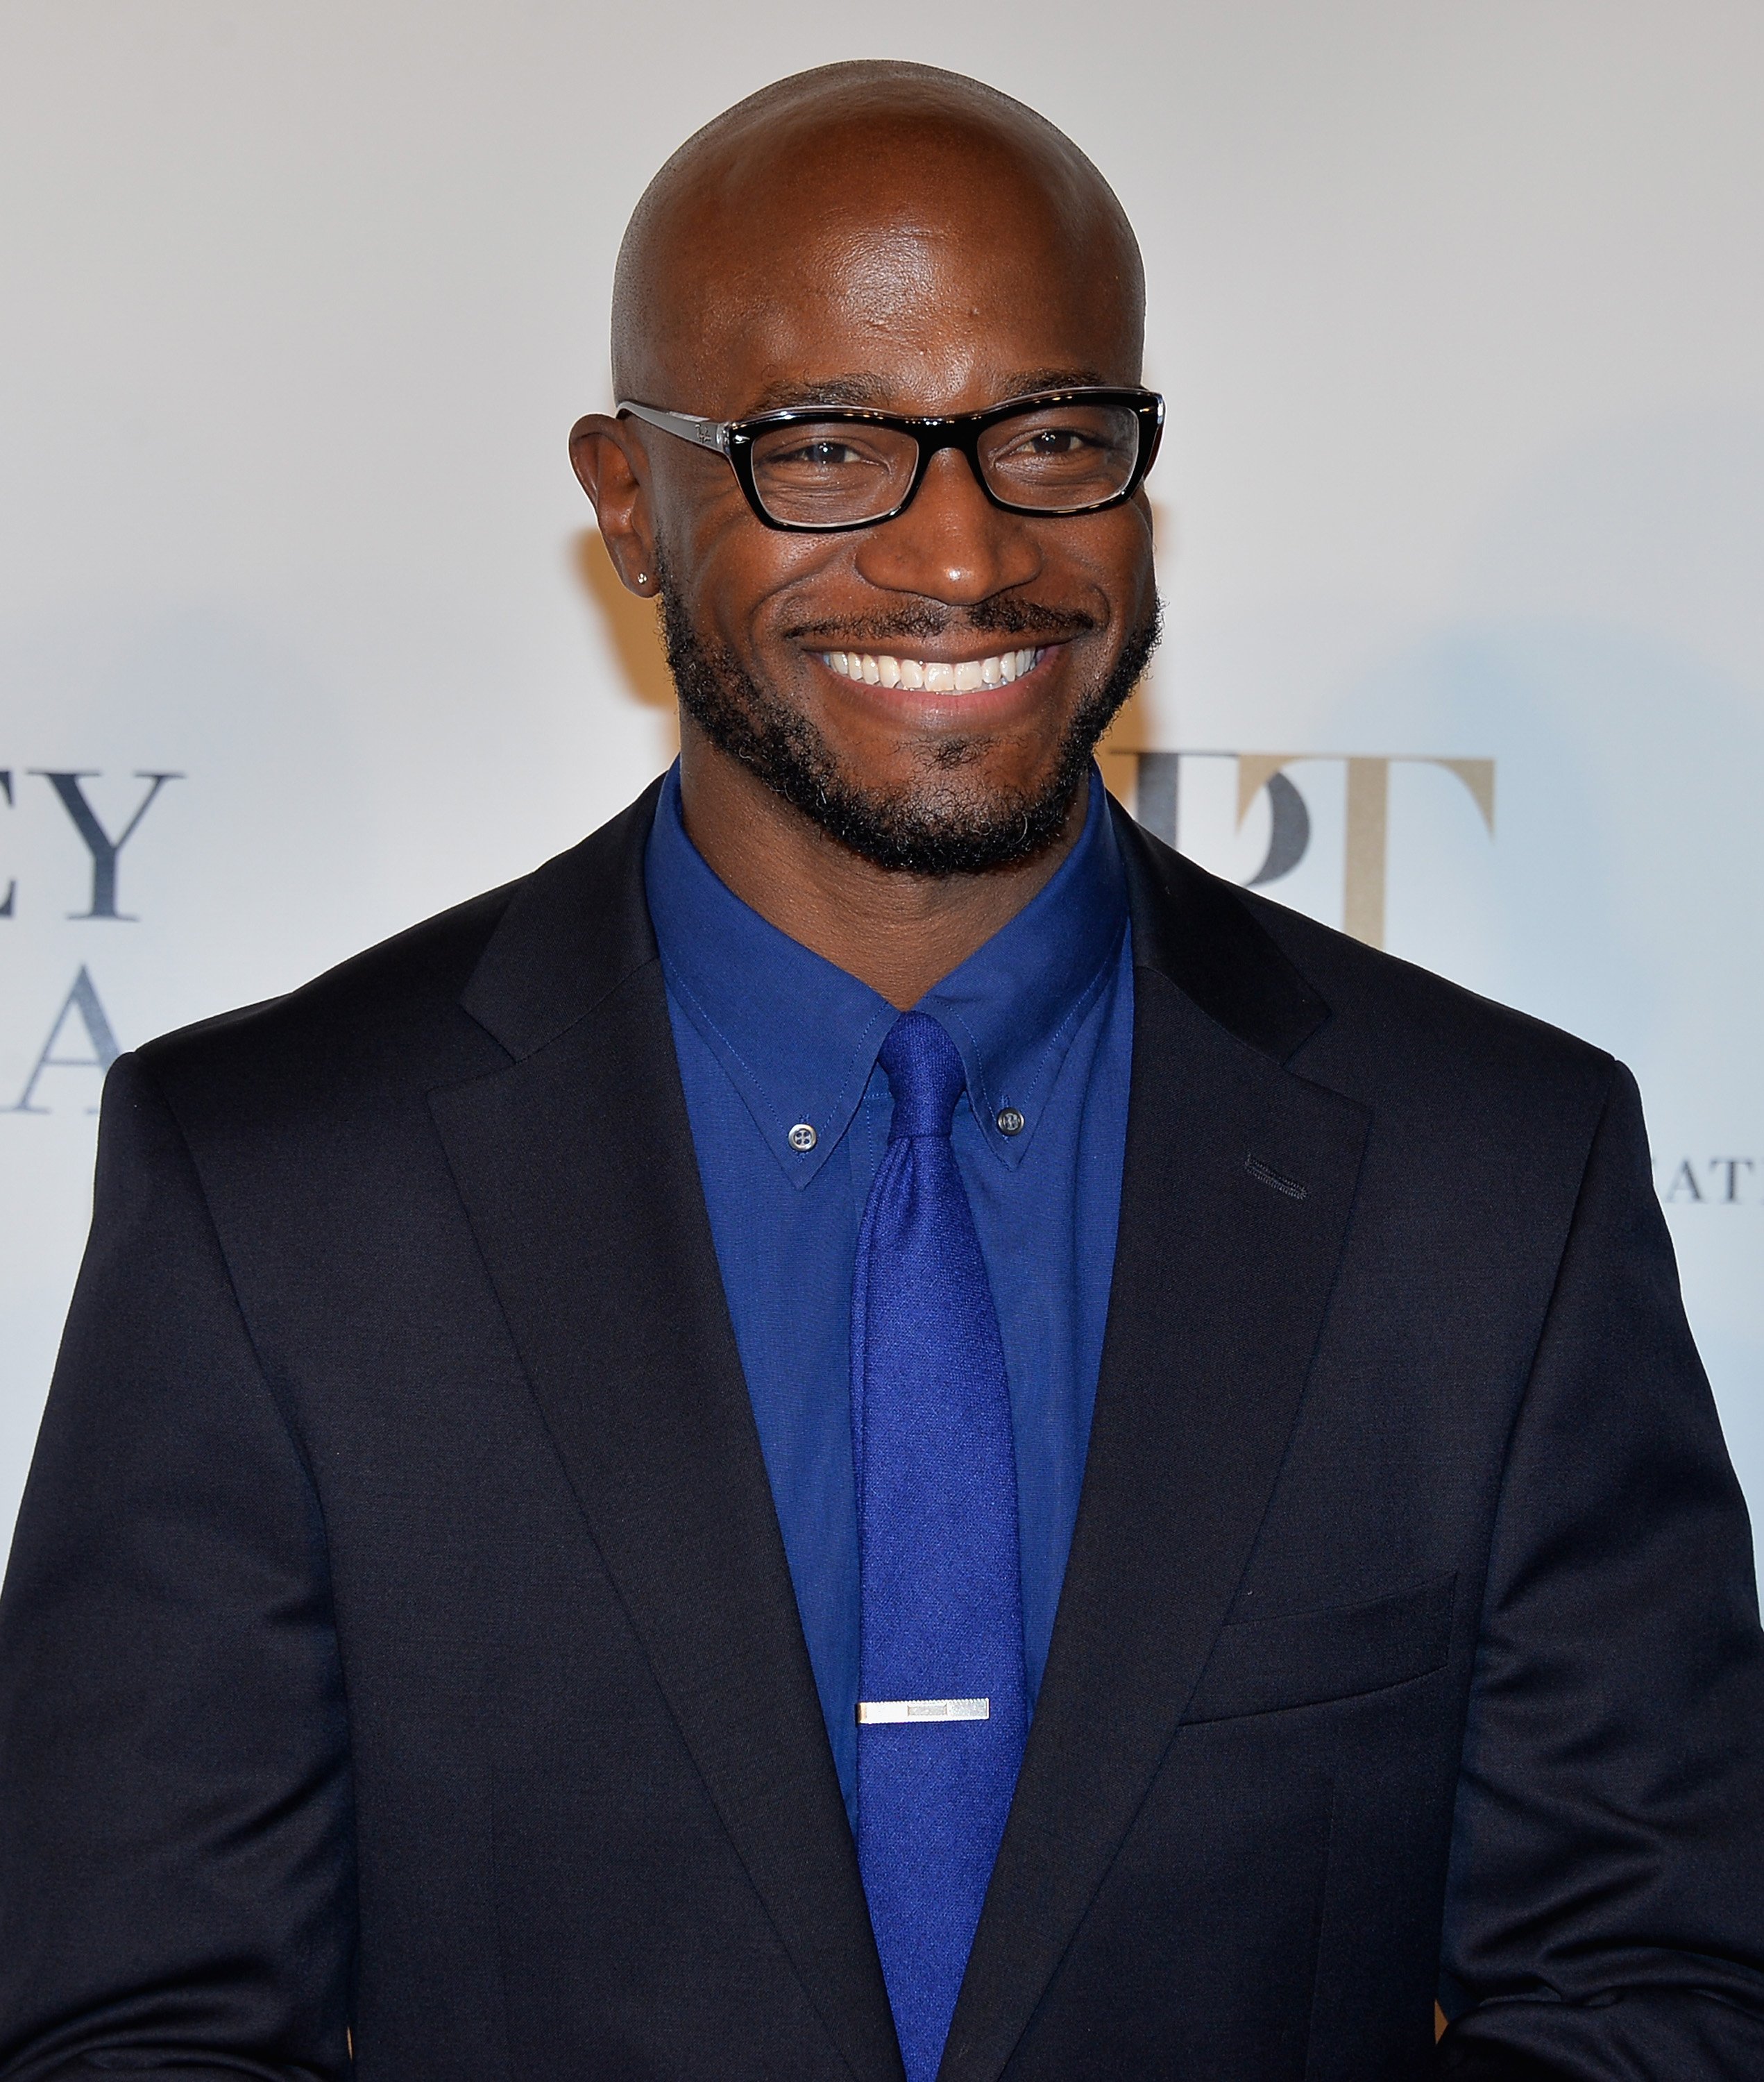 Taye Diggs attends the American Ballet Theatre 2013 opening night fall gala on October 30, 2013, in New York City. | Source: Getty Images.